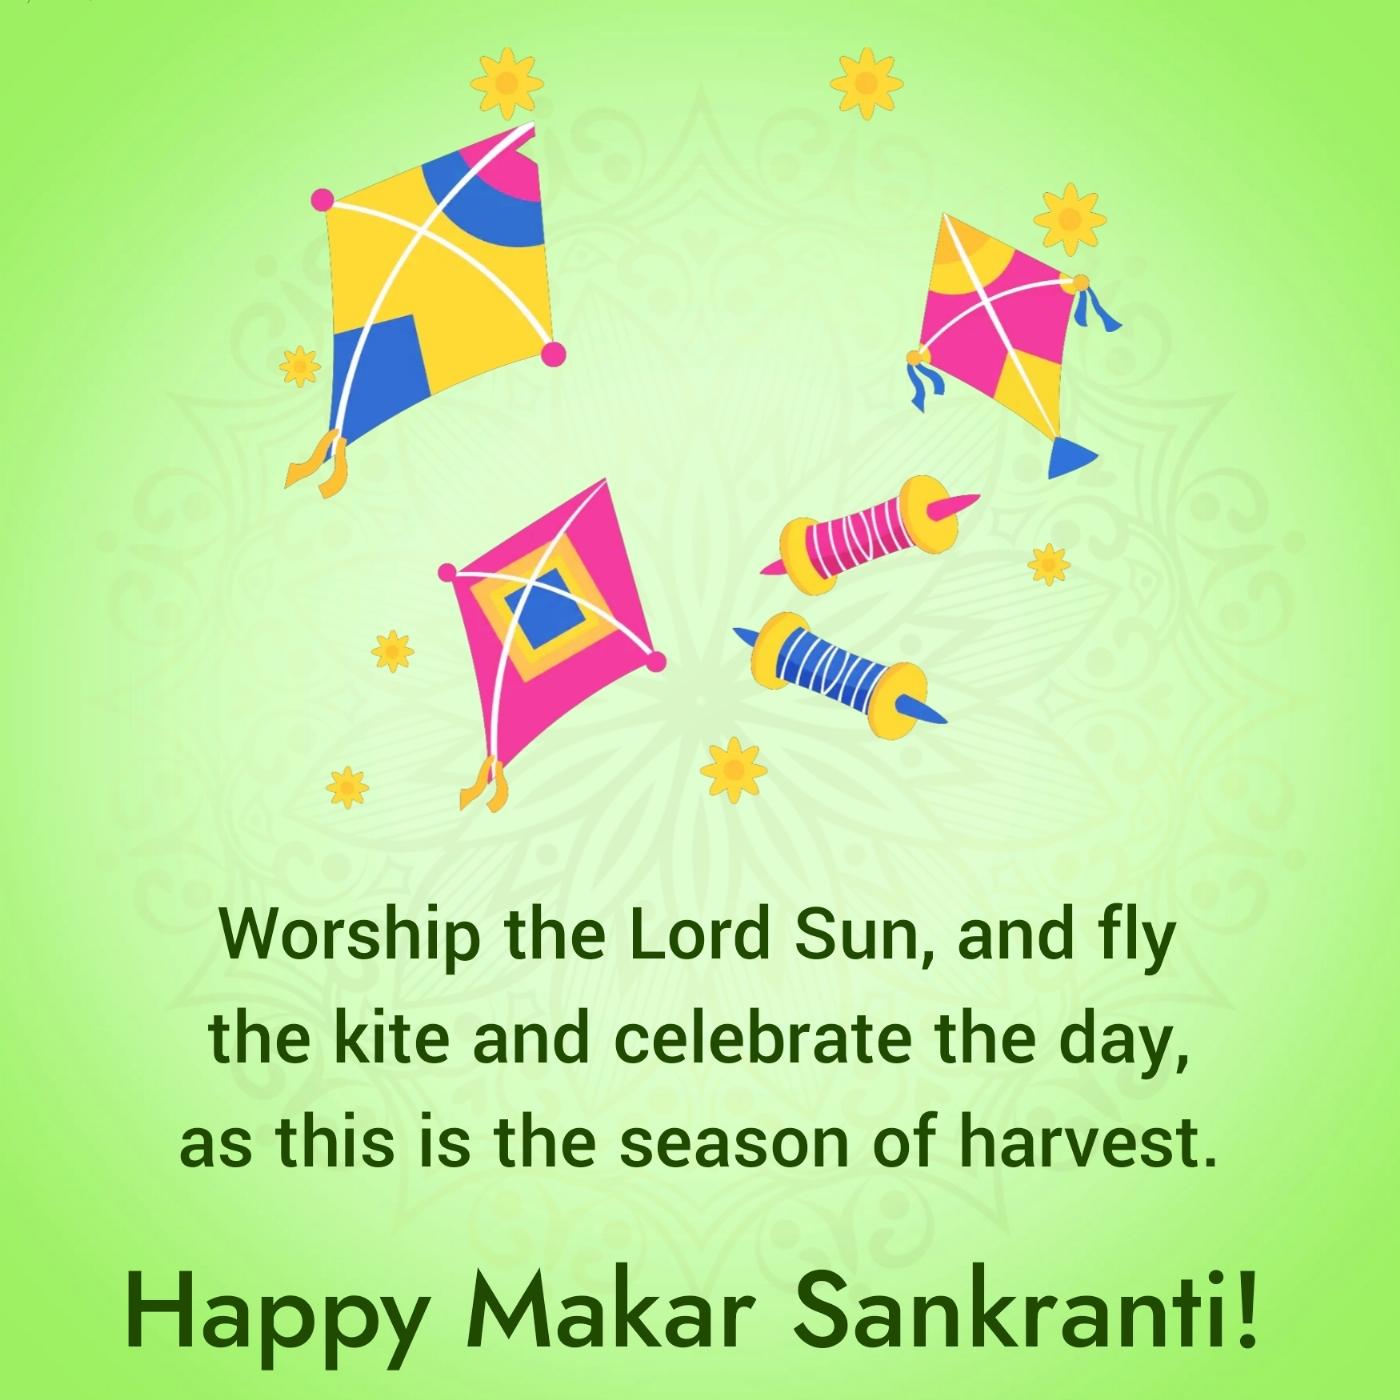 Worship the Lord Sun and fly the kite and celebrate the day